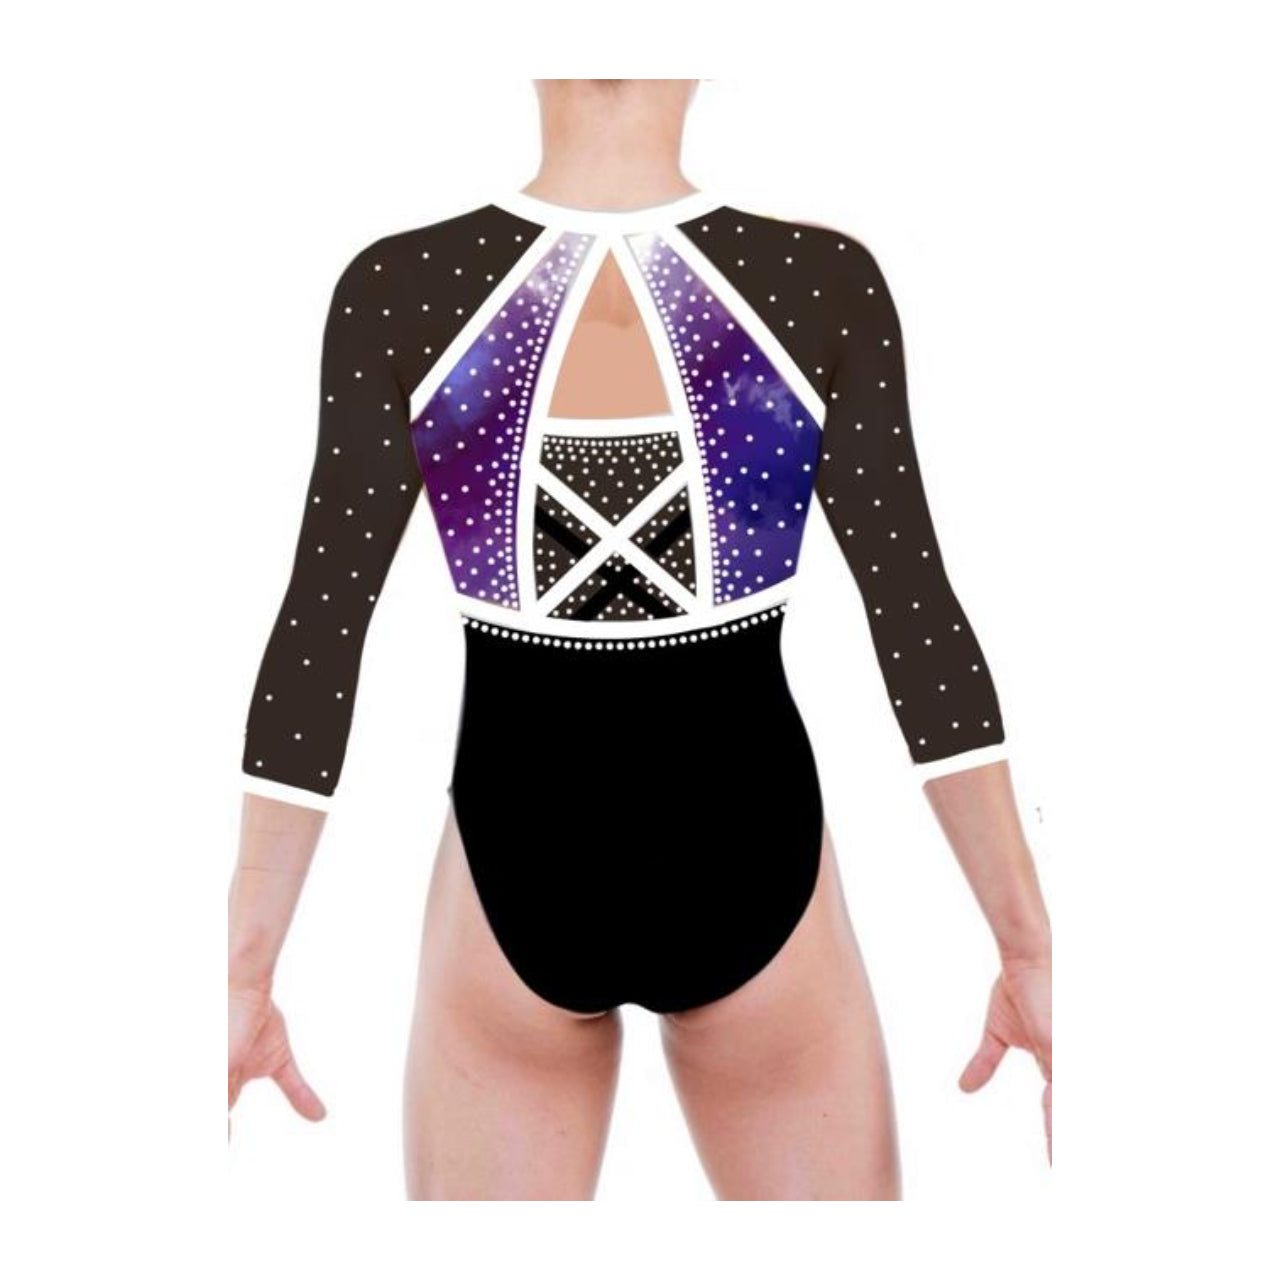 Gymnastics Competition (Girls Competition Leotard), 6 - 18 years